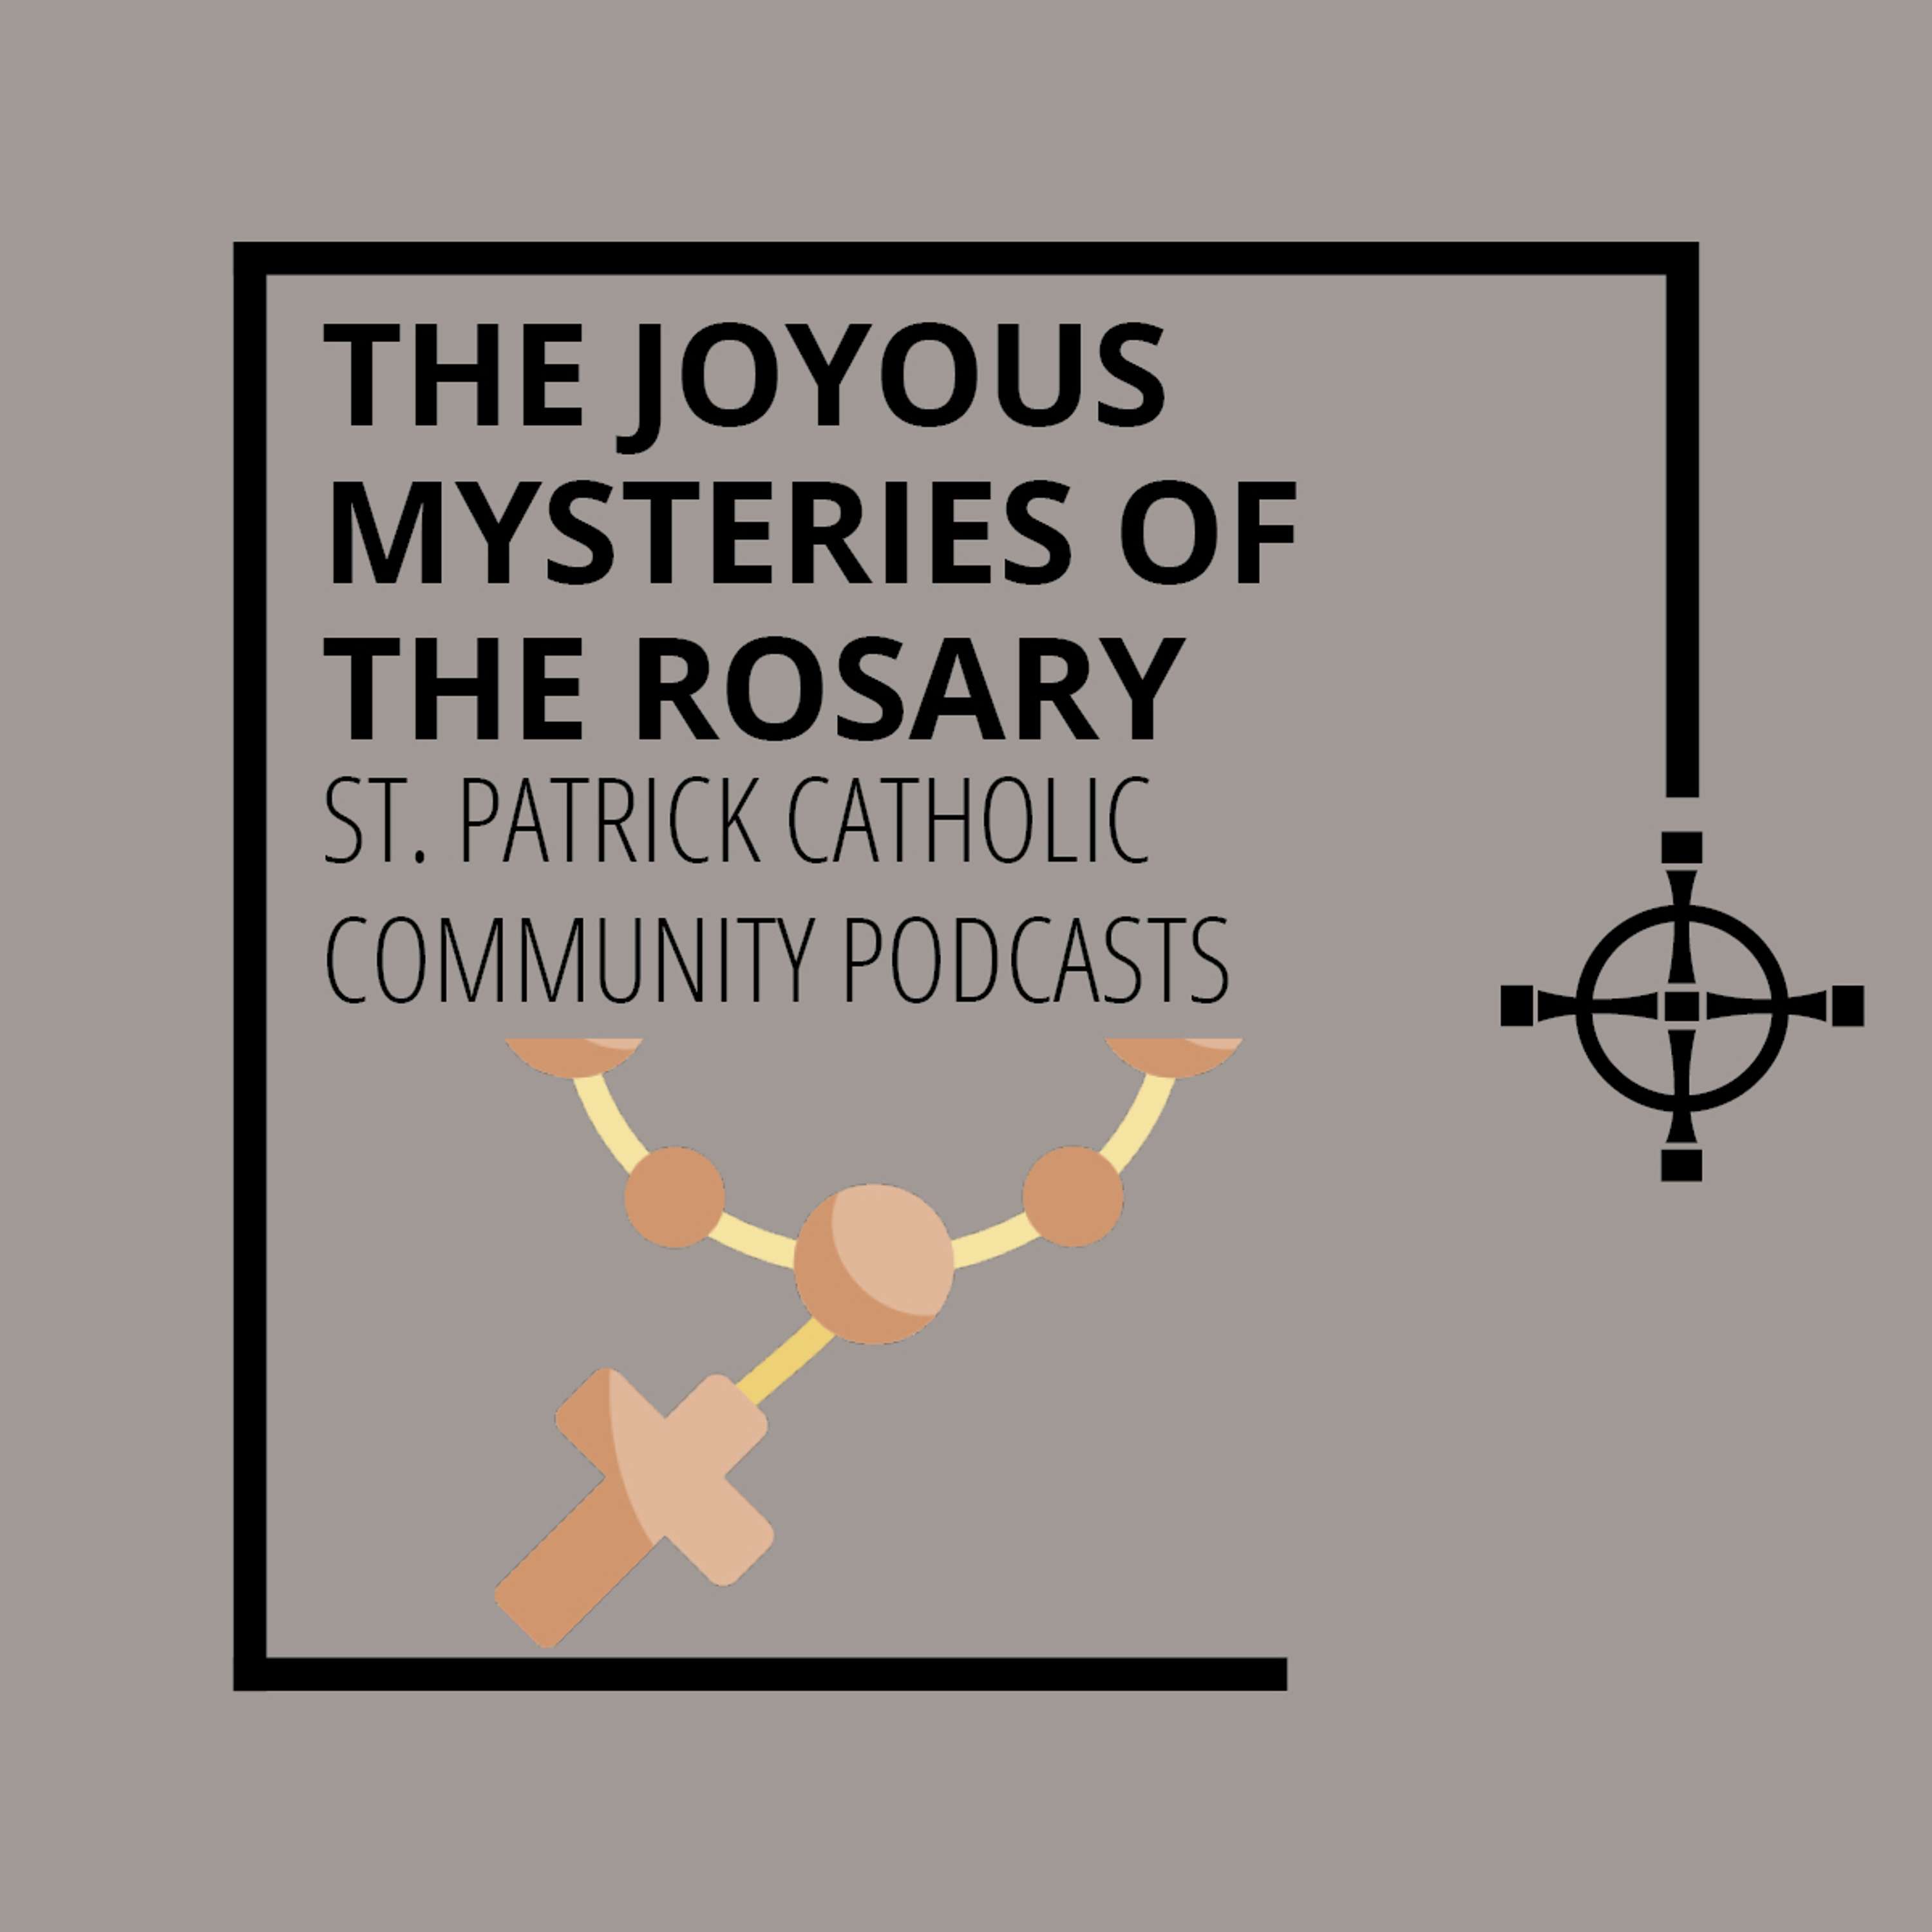 The Joyous Mysteries Of The Rosary